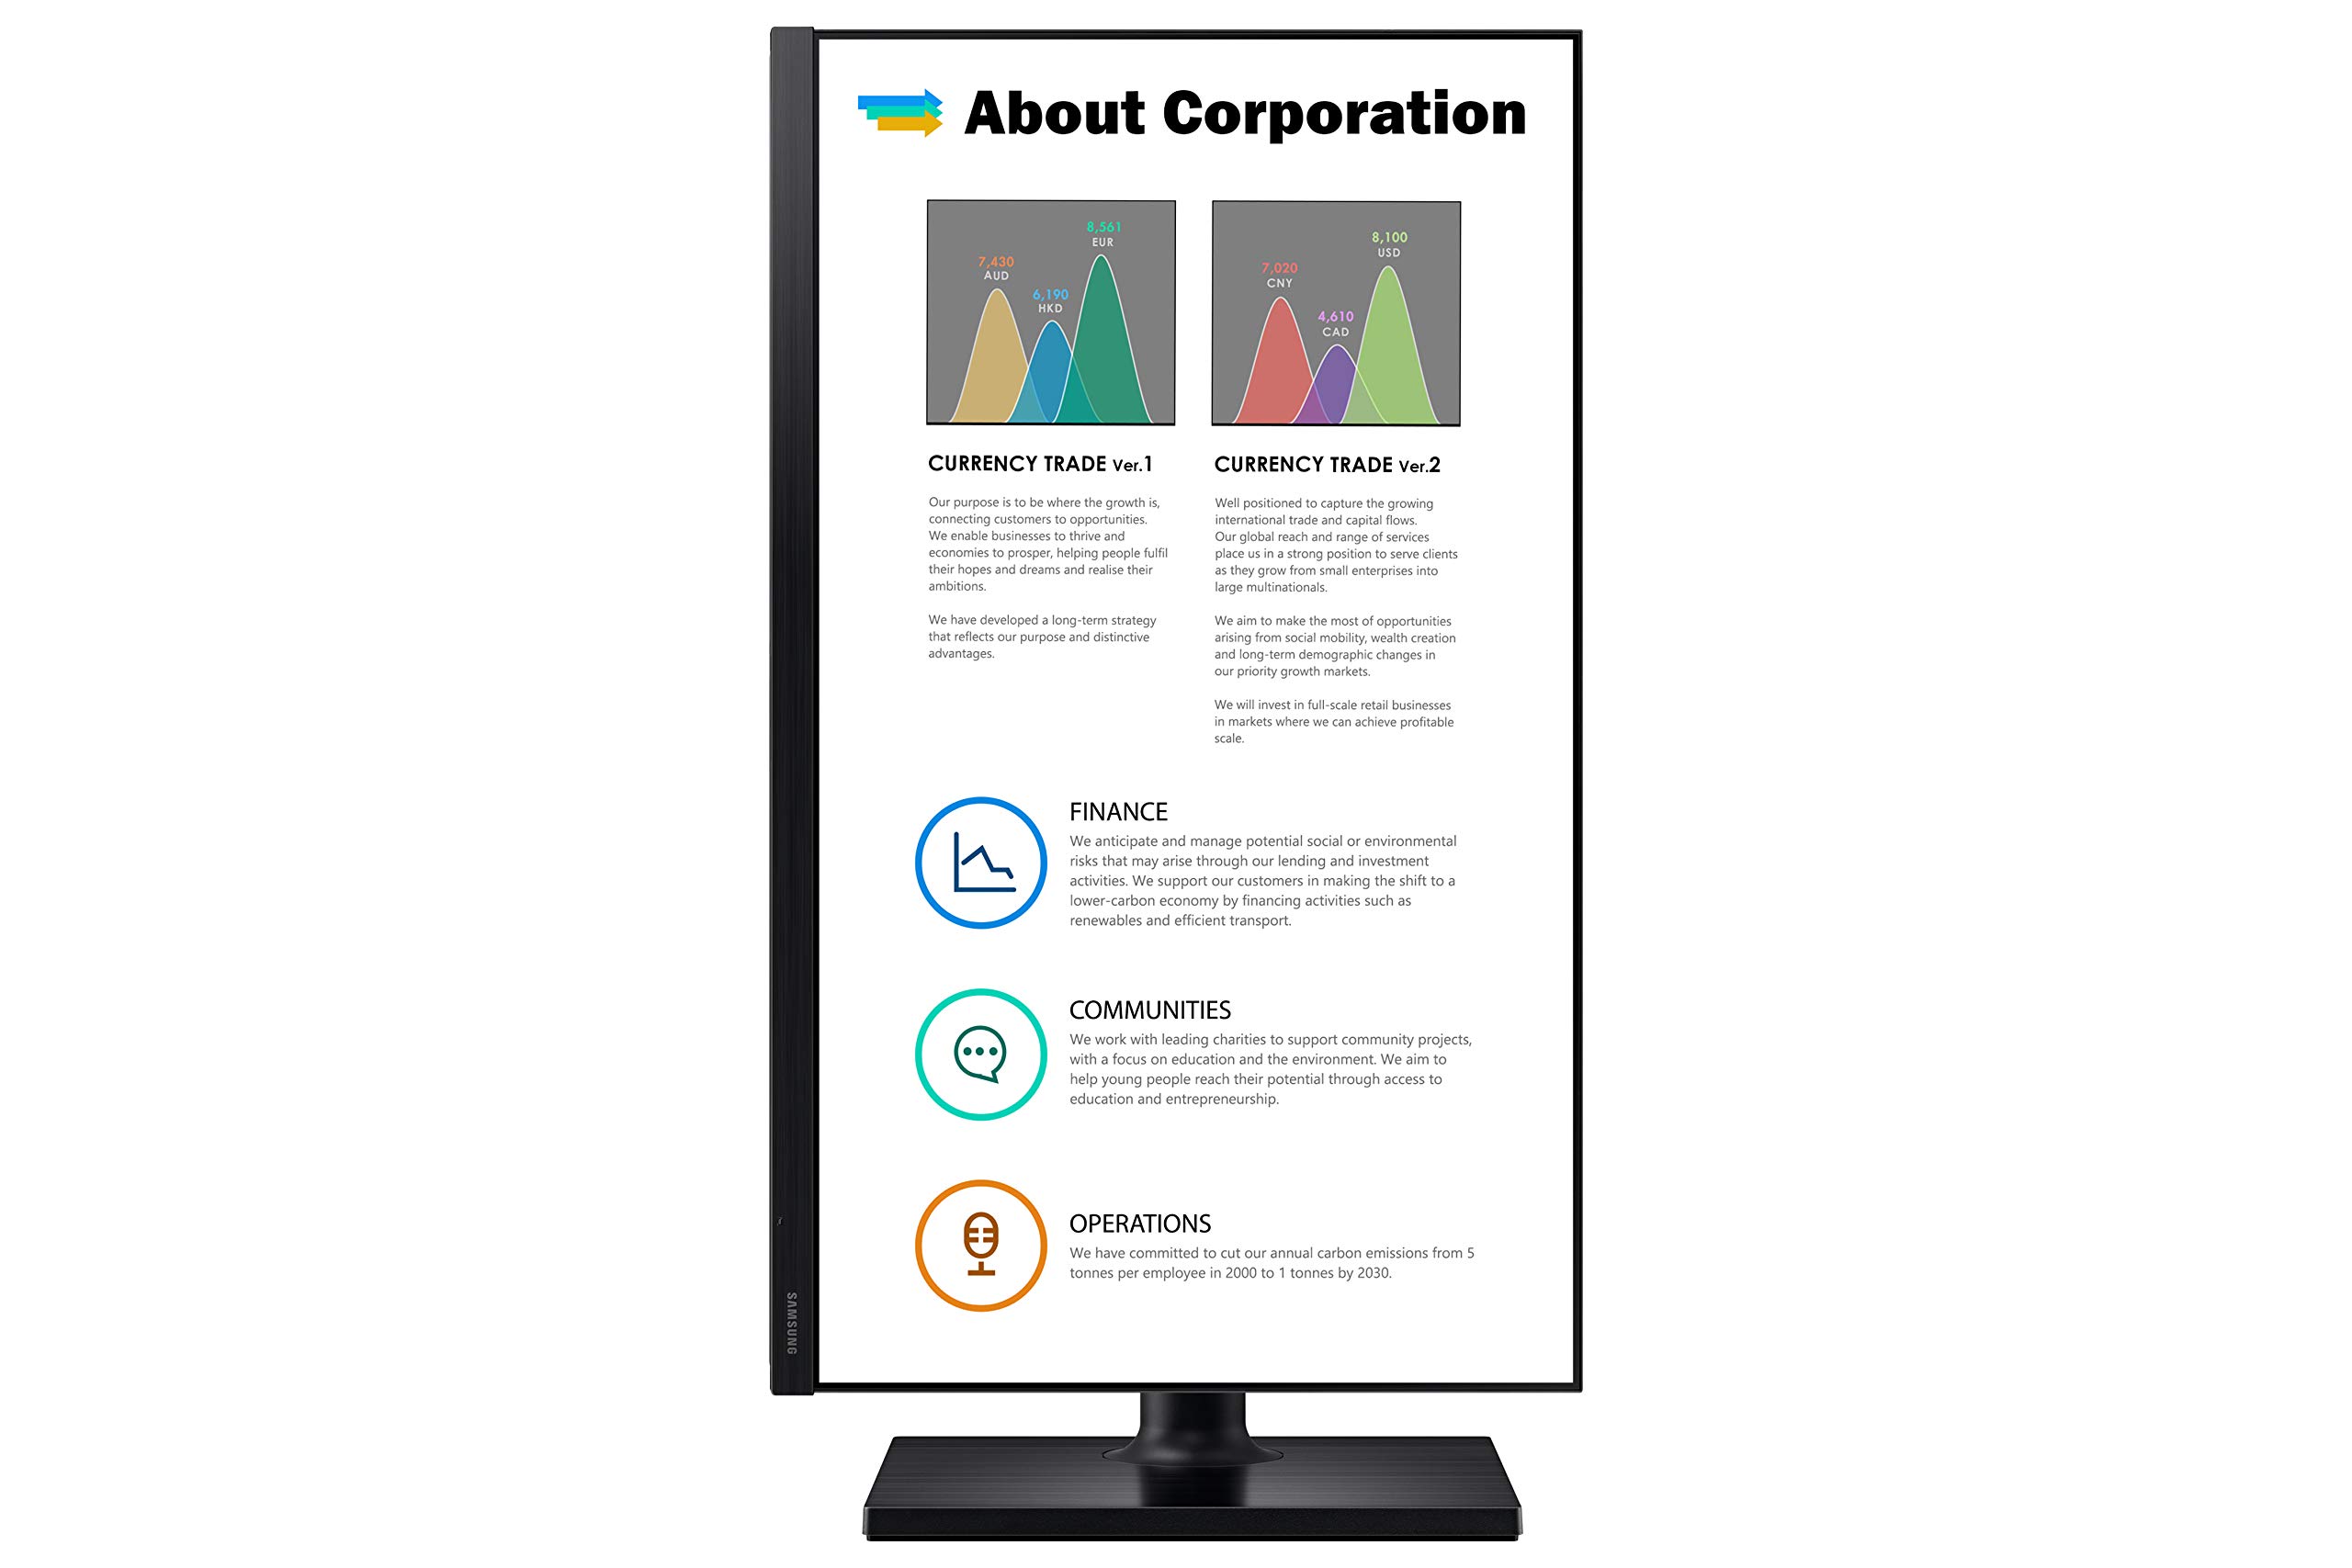 Samsung Business FT452 Series 22 inch 1080p 75Hz IPS Computer Monitor for Business with HDMI, DisplayPort, USB, HAS Stand (F22T452FQN) Black